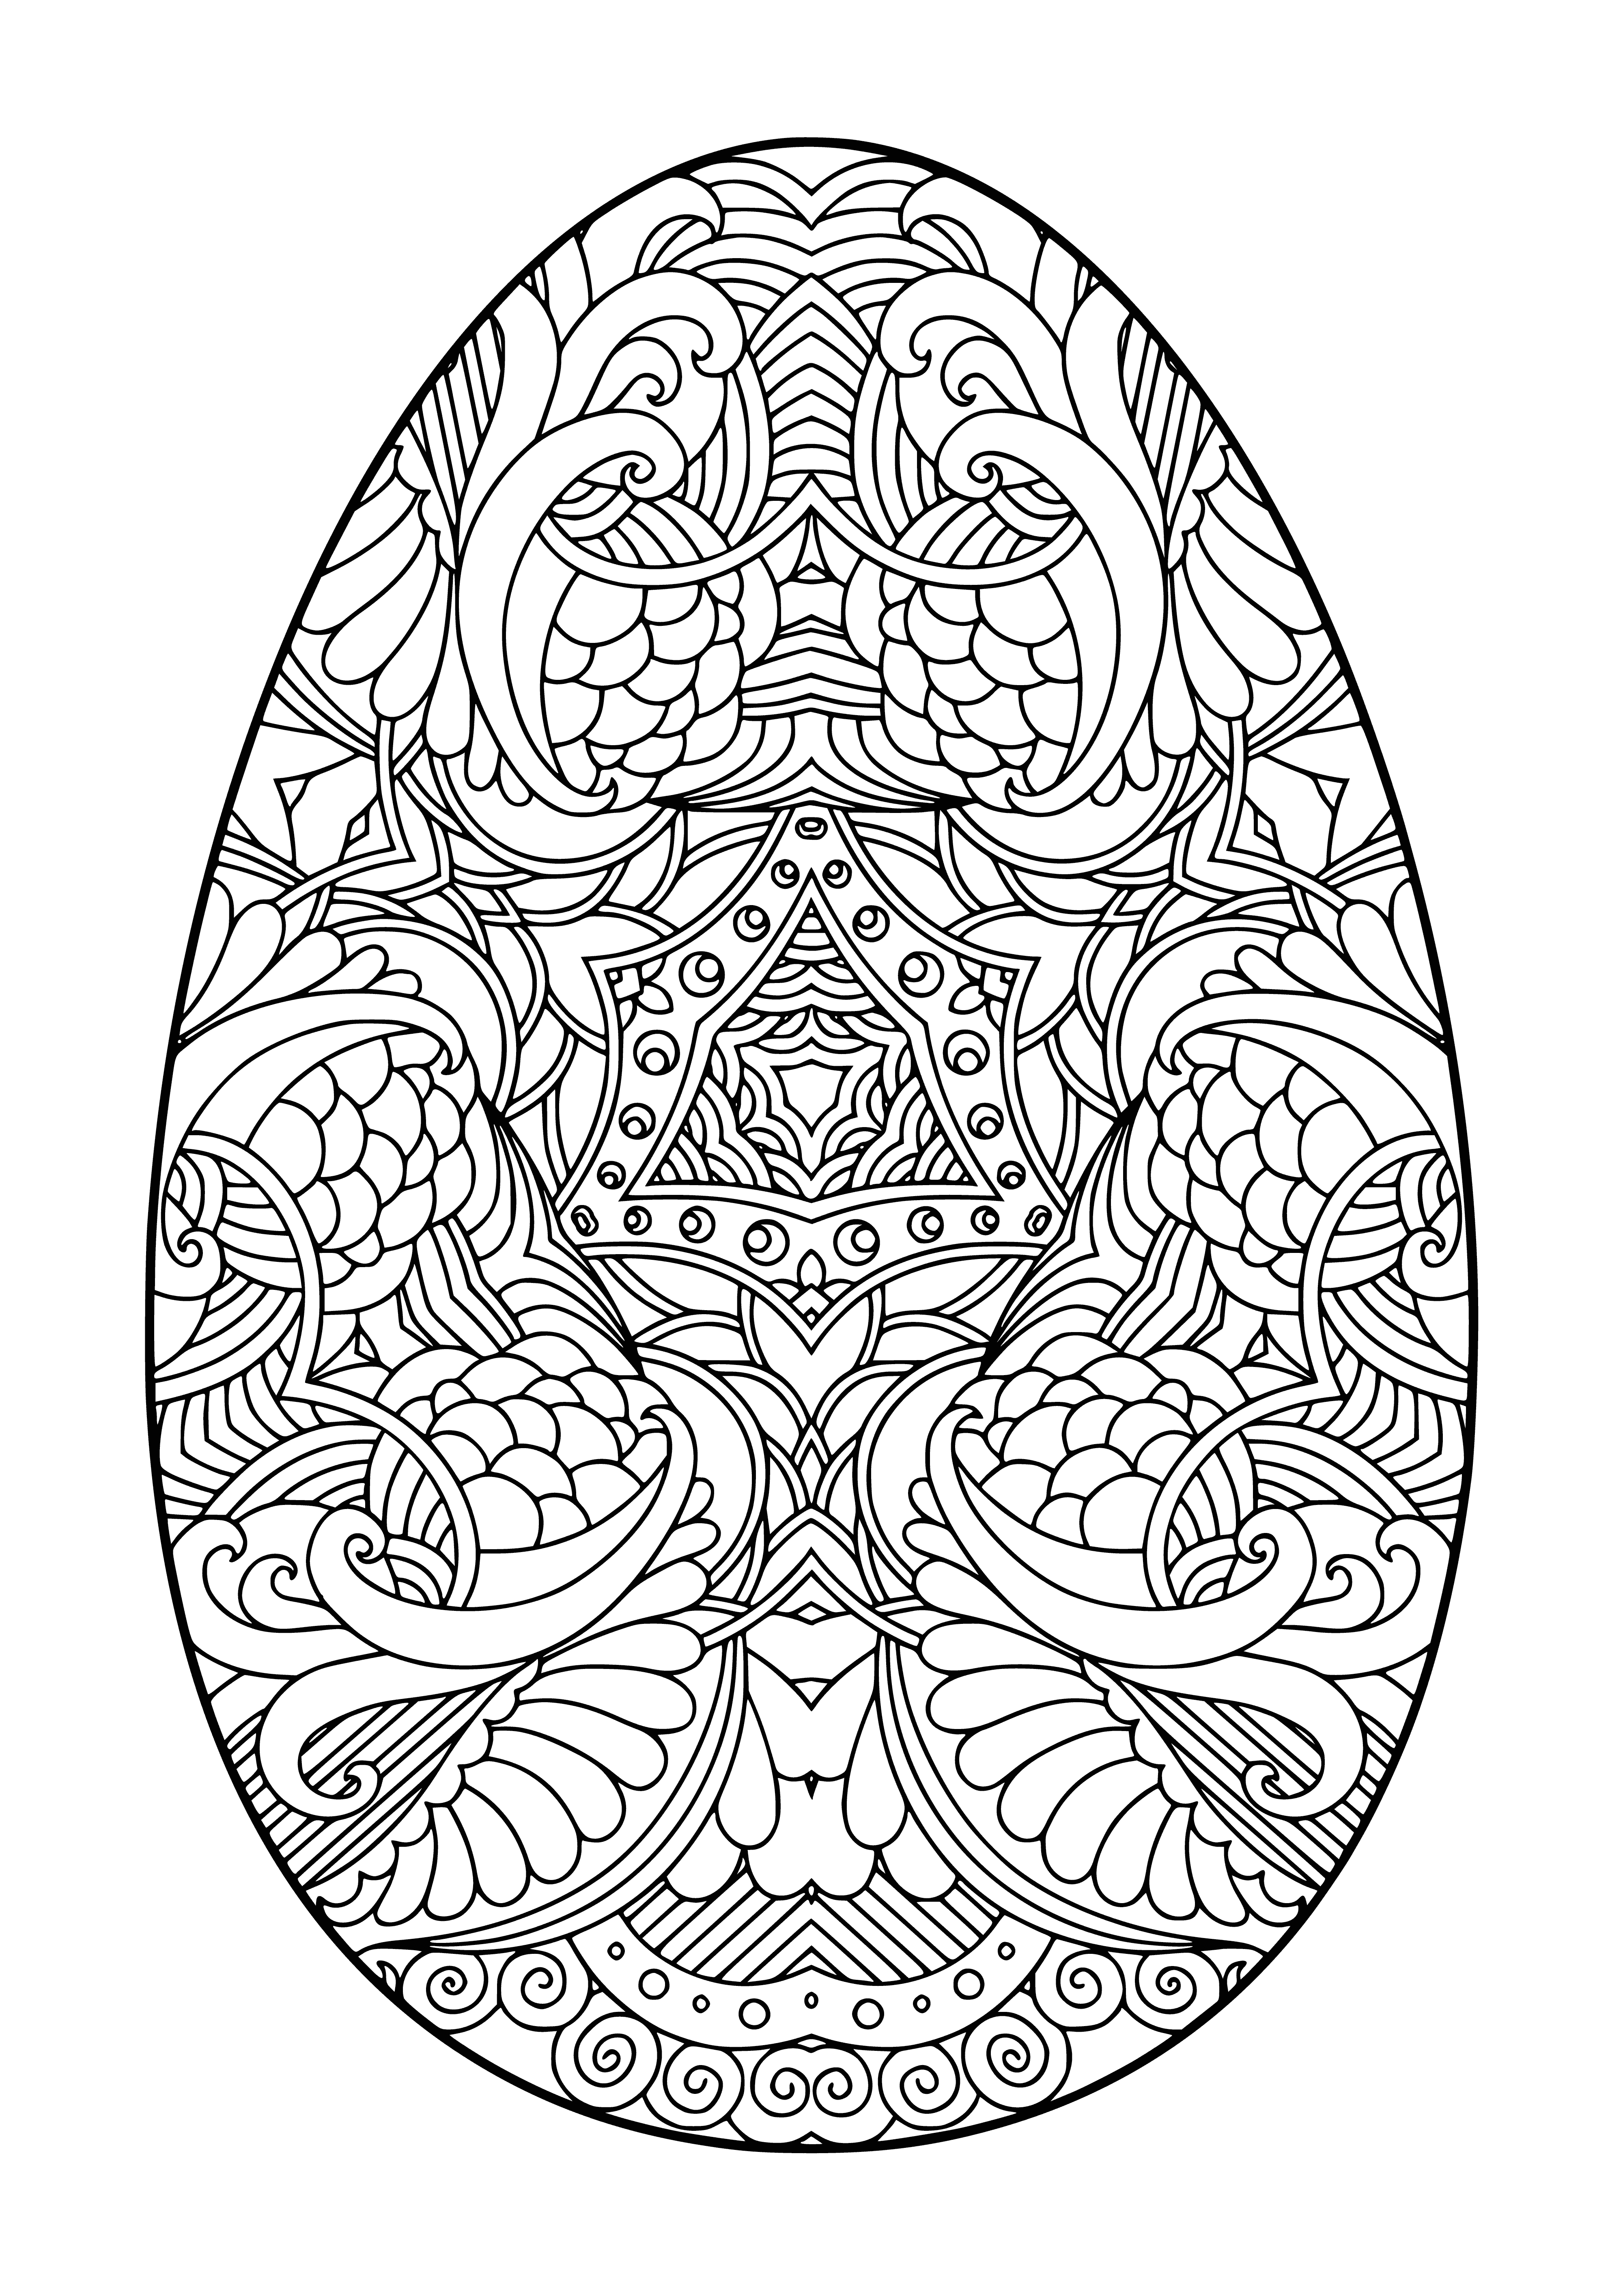 coloring page: An Easter egg coloring page featuring a white egg with a yolk, surrounded by flowers. #EasterCrafts #Coloring